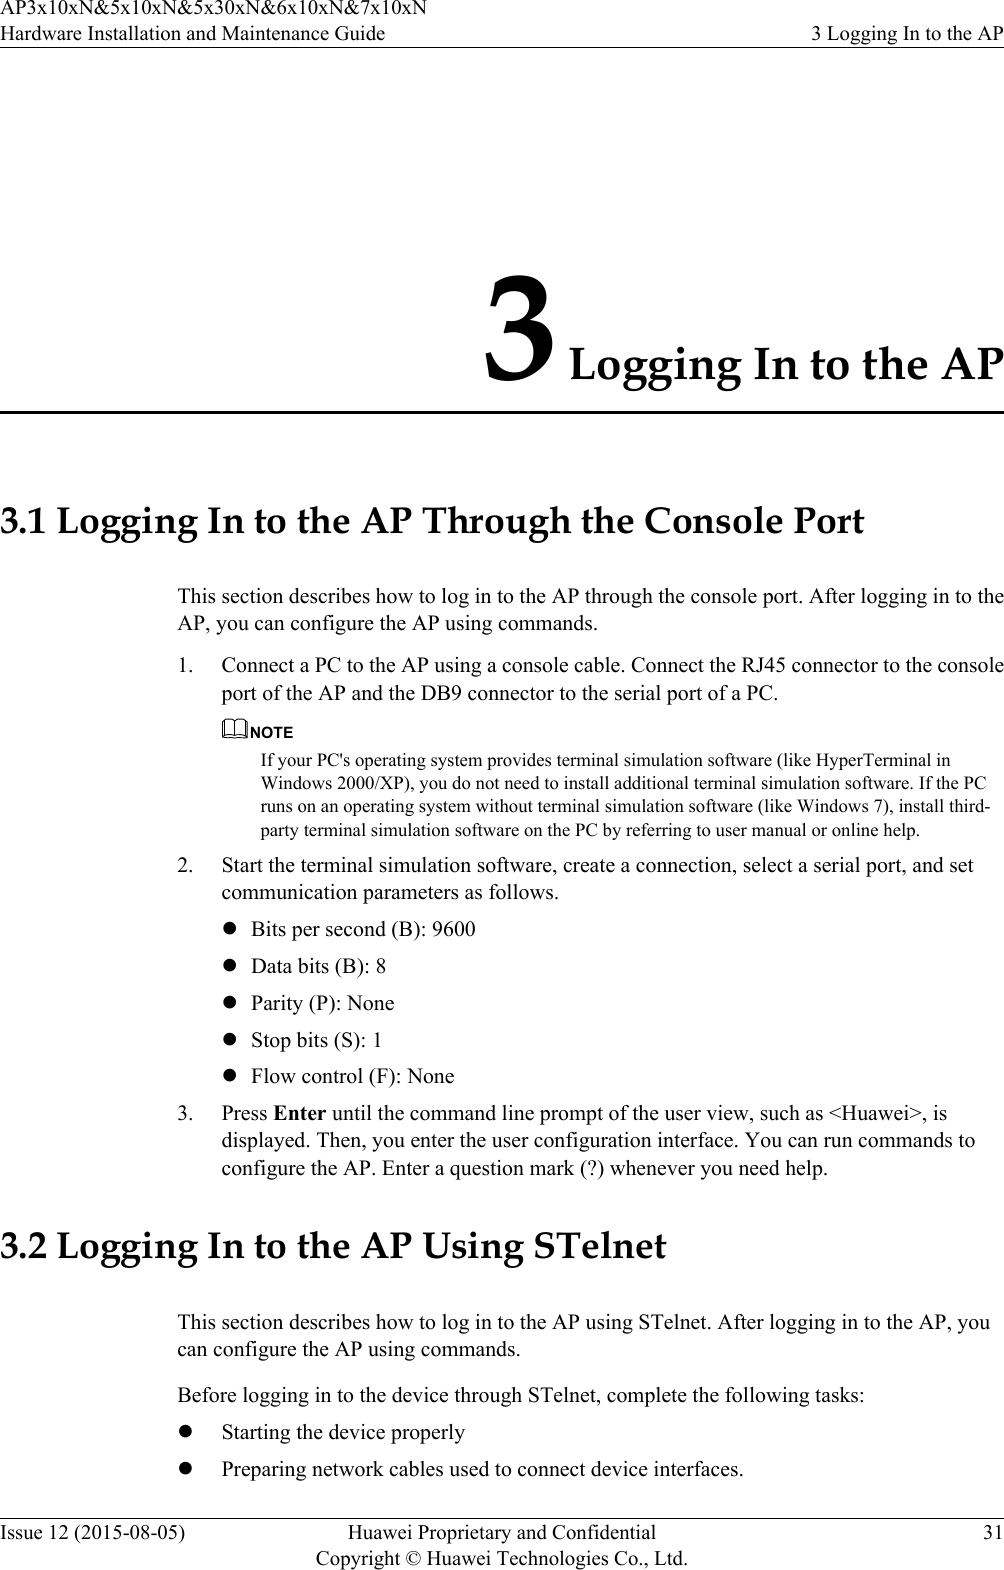 3 Logging In to the AP3.1 Logging In to the AP Through the Console PortThis section describes how to log in to the AP through the console port. After logging in to theAP, you can configure the AP using commands.1. Connect a PC to the AP using a console cable. Connect the RJ45 connector to the consoleport of the AP and the DB9 connector to the serial port of a PC.NOTEIf your PC&apos;s operating system provides terminal simulation software (like HyperTerminal inWindows 2000/XP), you do not need to install additional terminal simulation software. If the PCruns on an operating system without terminal simulation software (like Windows 7), install third-party terminal simulation software on the PC by referring to user manual or online help.2. Start the terminal simulation software, create a connection, select a serial port, and setcommunication parameters as follows.lBits per second (B): 9600lData bits (B): 8lParity (P): NonelStop bits (S): 1lFlow control (F): None3. Press Enter until the command line prompt of the user view, such as &lt;Huawei&gt;, isdisplayed. Then, you enter the user configuration interface. You can run commands toconfigure the AP. Enter a question mark (?) whenever you need help.3.2 Logging In to the AP Using STelnetThis section describes how to log in to the AP using STelnet. After logging in to the AP, youcan configure the AP using commands.Before logging in to the device through STelnet, complete the following tasks:lStarting the device properlylPreparing network cables used to connect device interfaces.AP3x10xN&amp;5x10xN&amp;5x30xN&amp;6x10xN&amp;7x10xNHardware Installation and Maintenance Guide 3 Logging In to the APIssue 12 (2015-08-05) Huawei Proprietary and ConfidentialCopyright © Huawei Technologies Co., Ltd.31